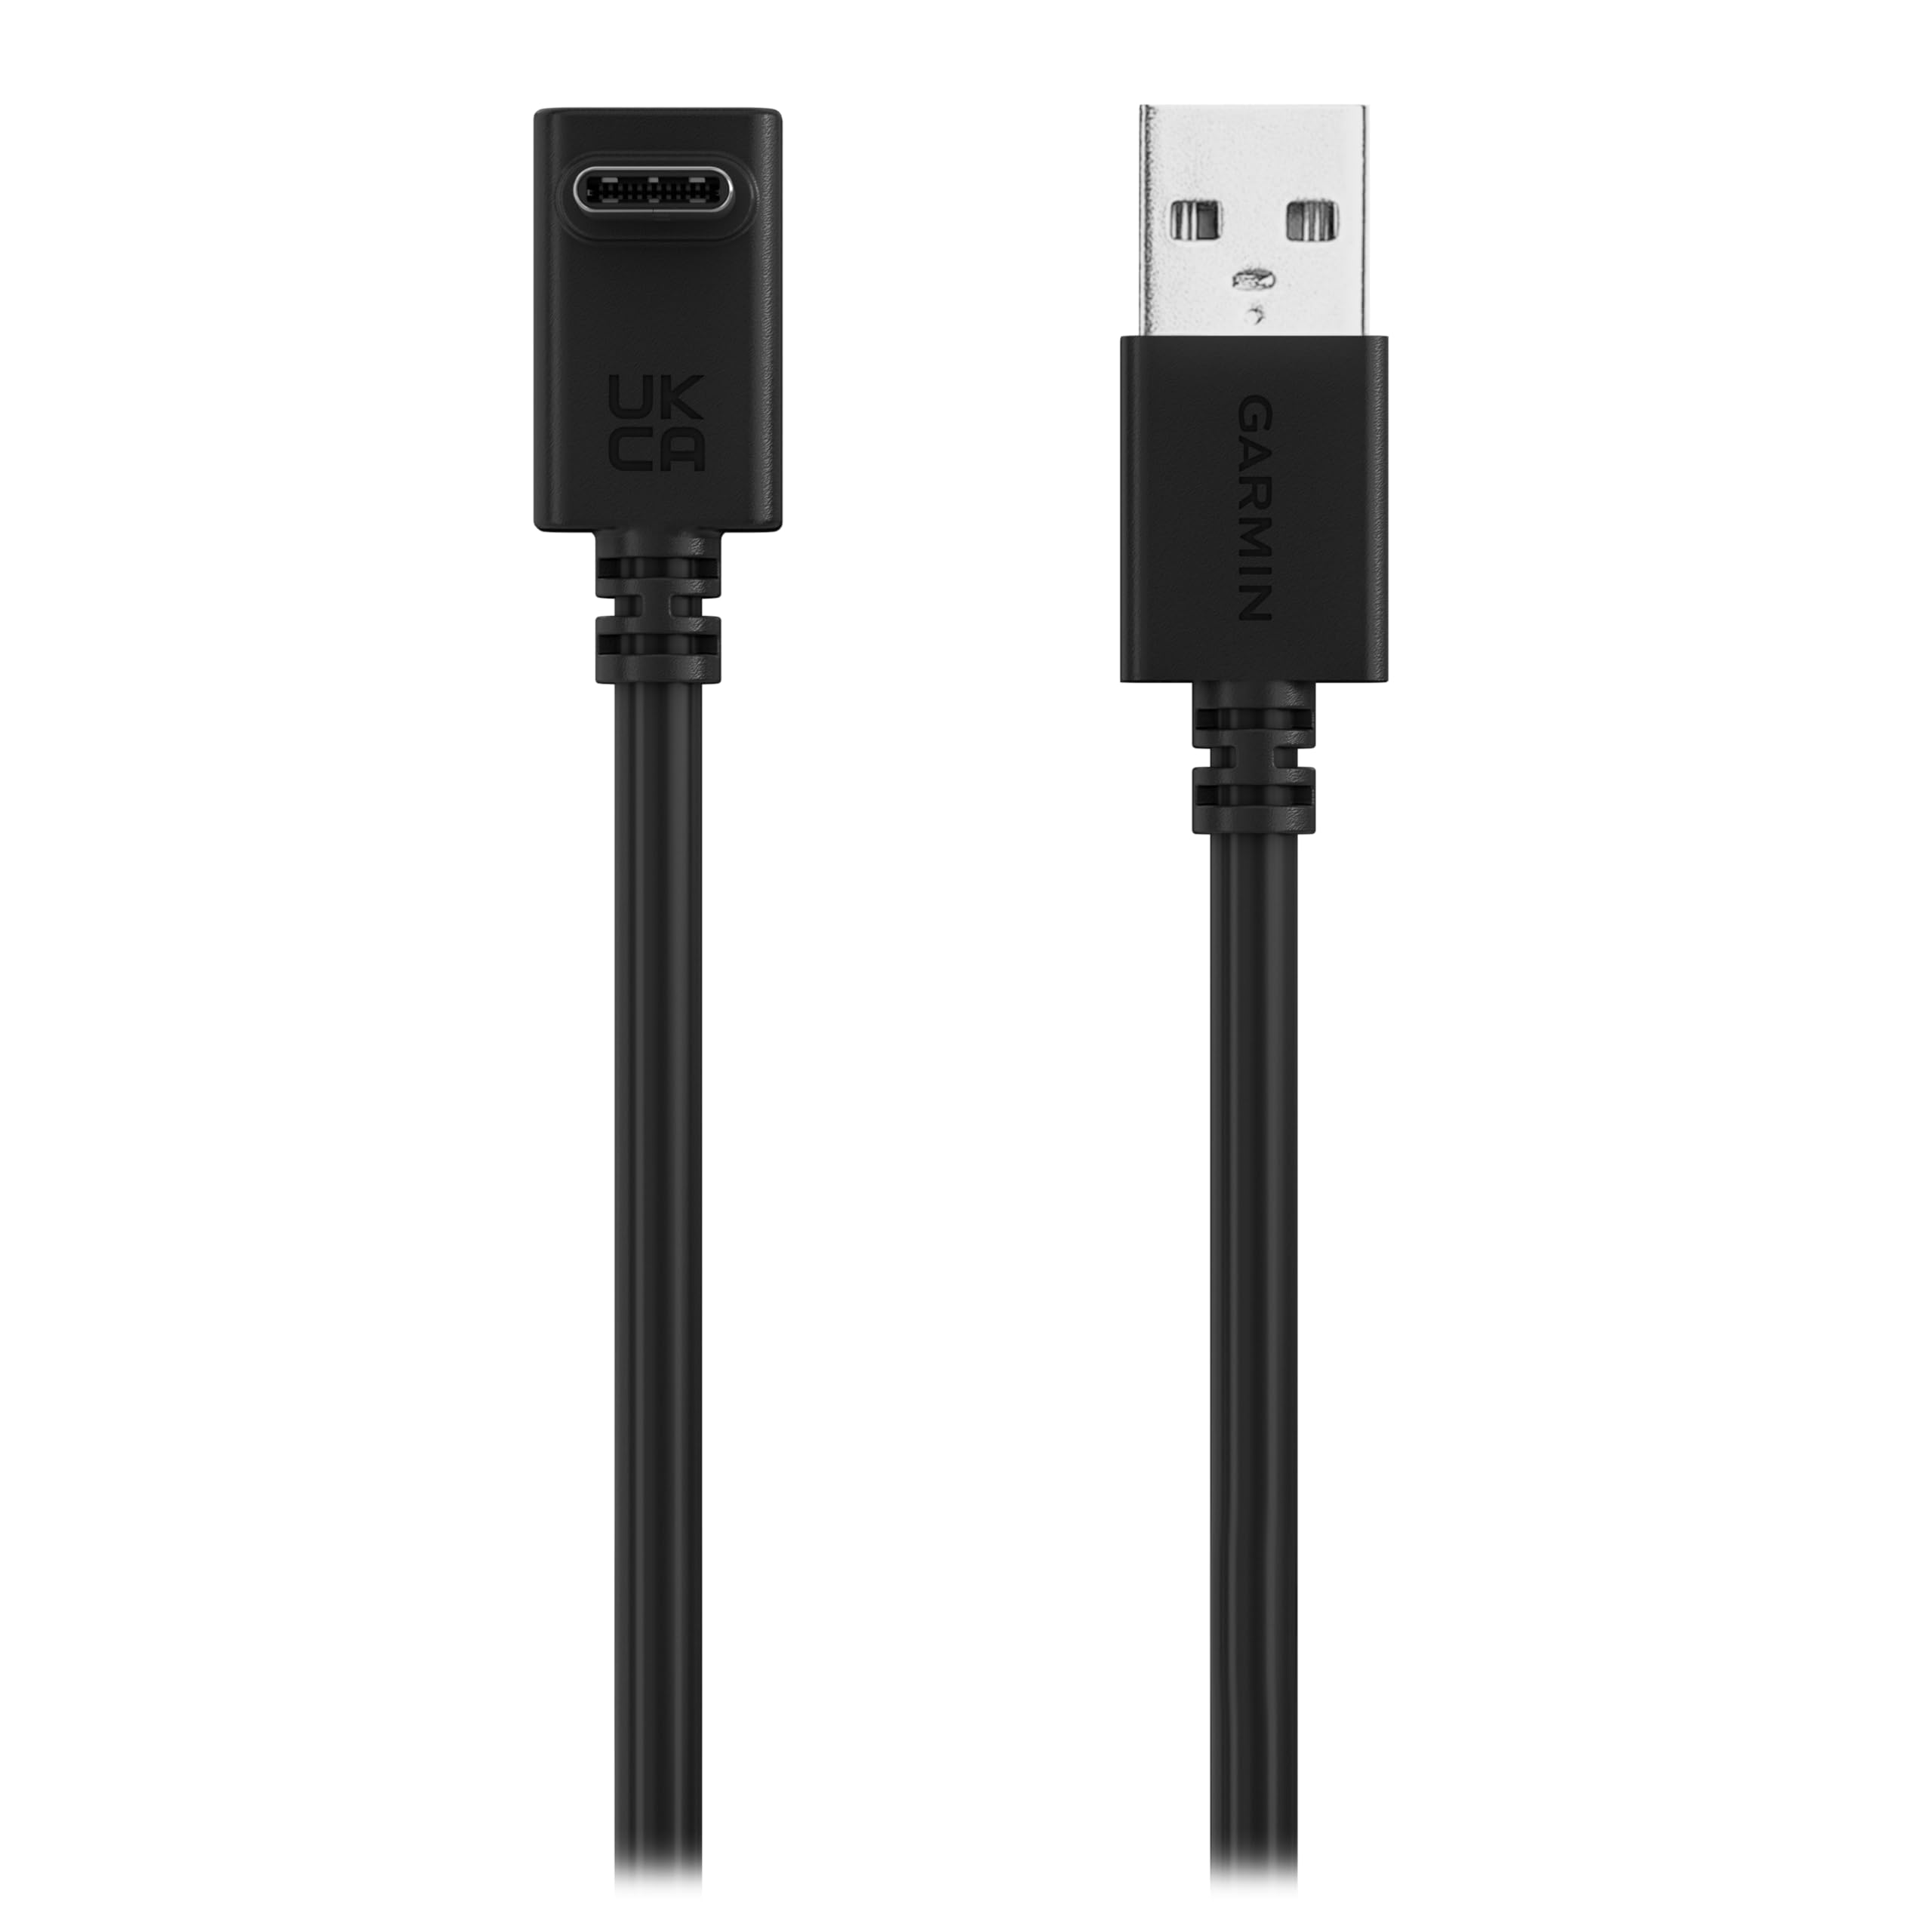 Garmin New OEM USB-C Vehicle Power Cable Cable with 12 Volt Adapter, 010-13199-04